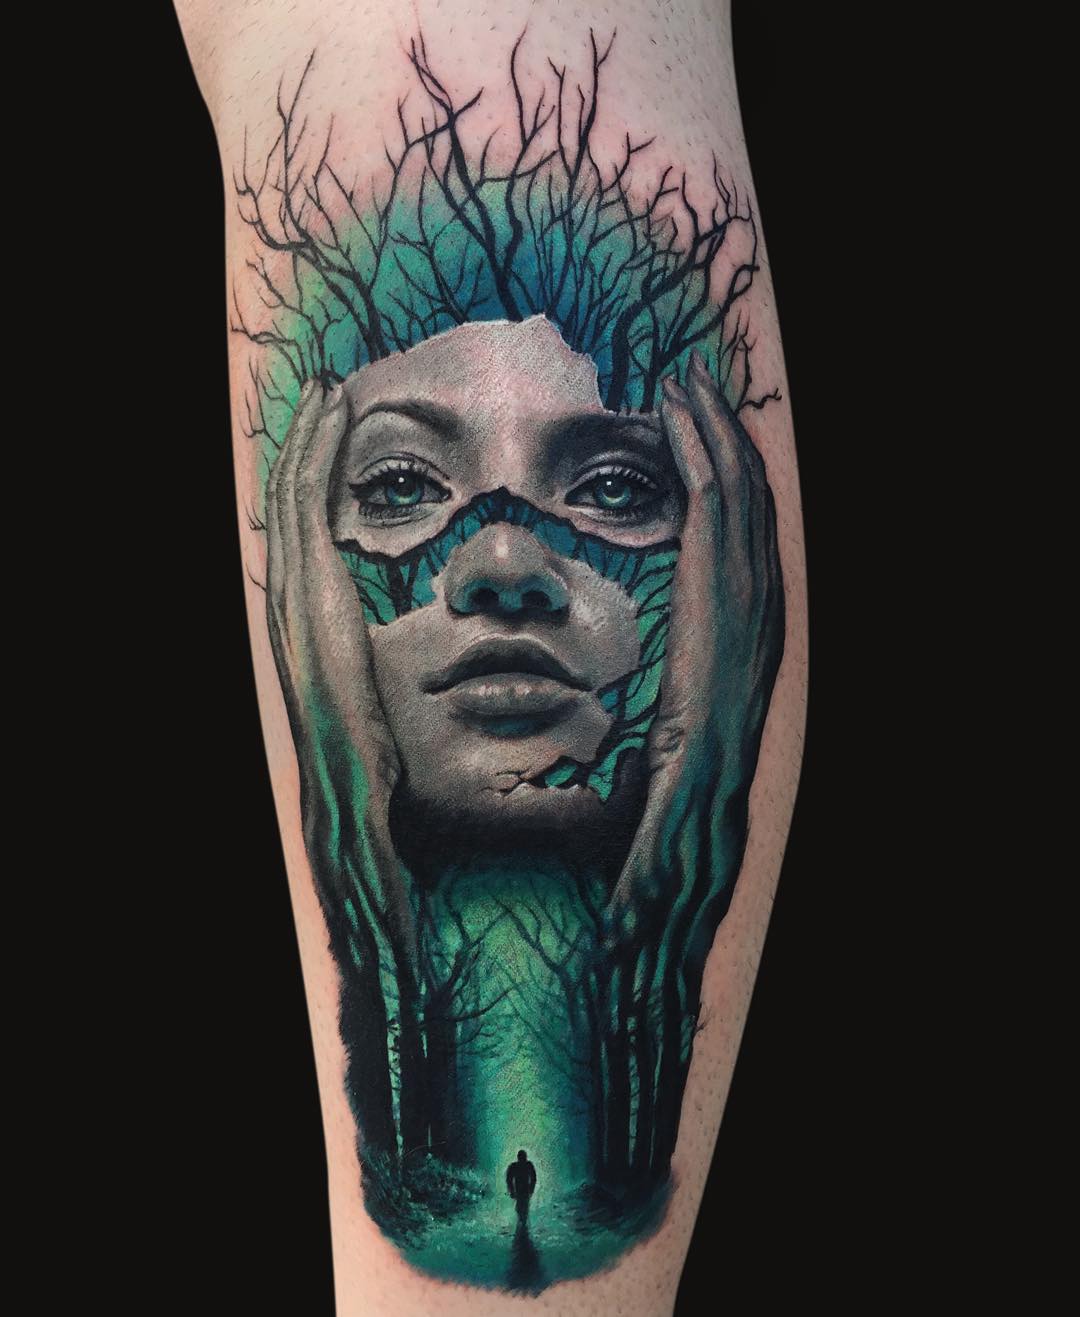 Tattoo uploaded by Lolita Borges Cunha  Surreal word tattoo and split face   Tattoodo